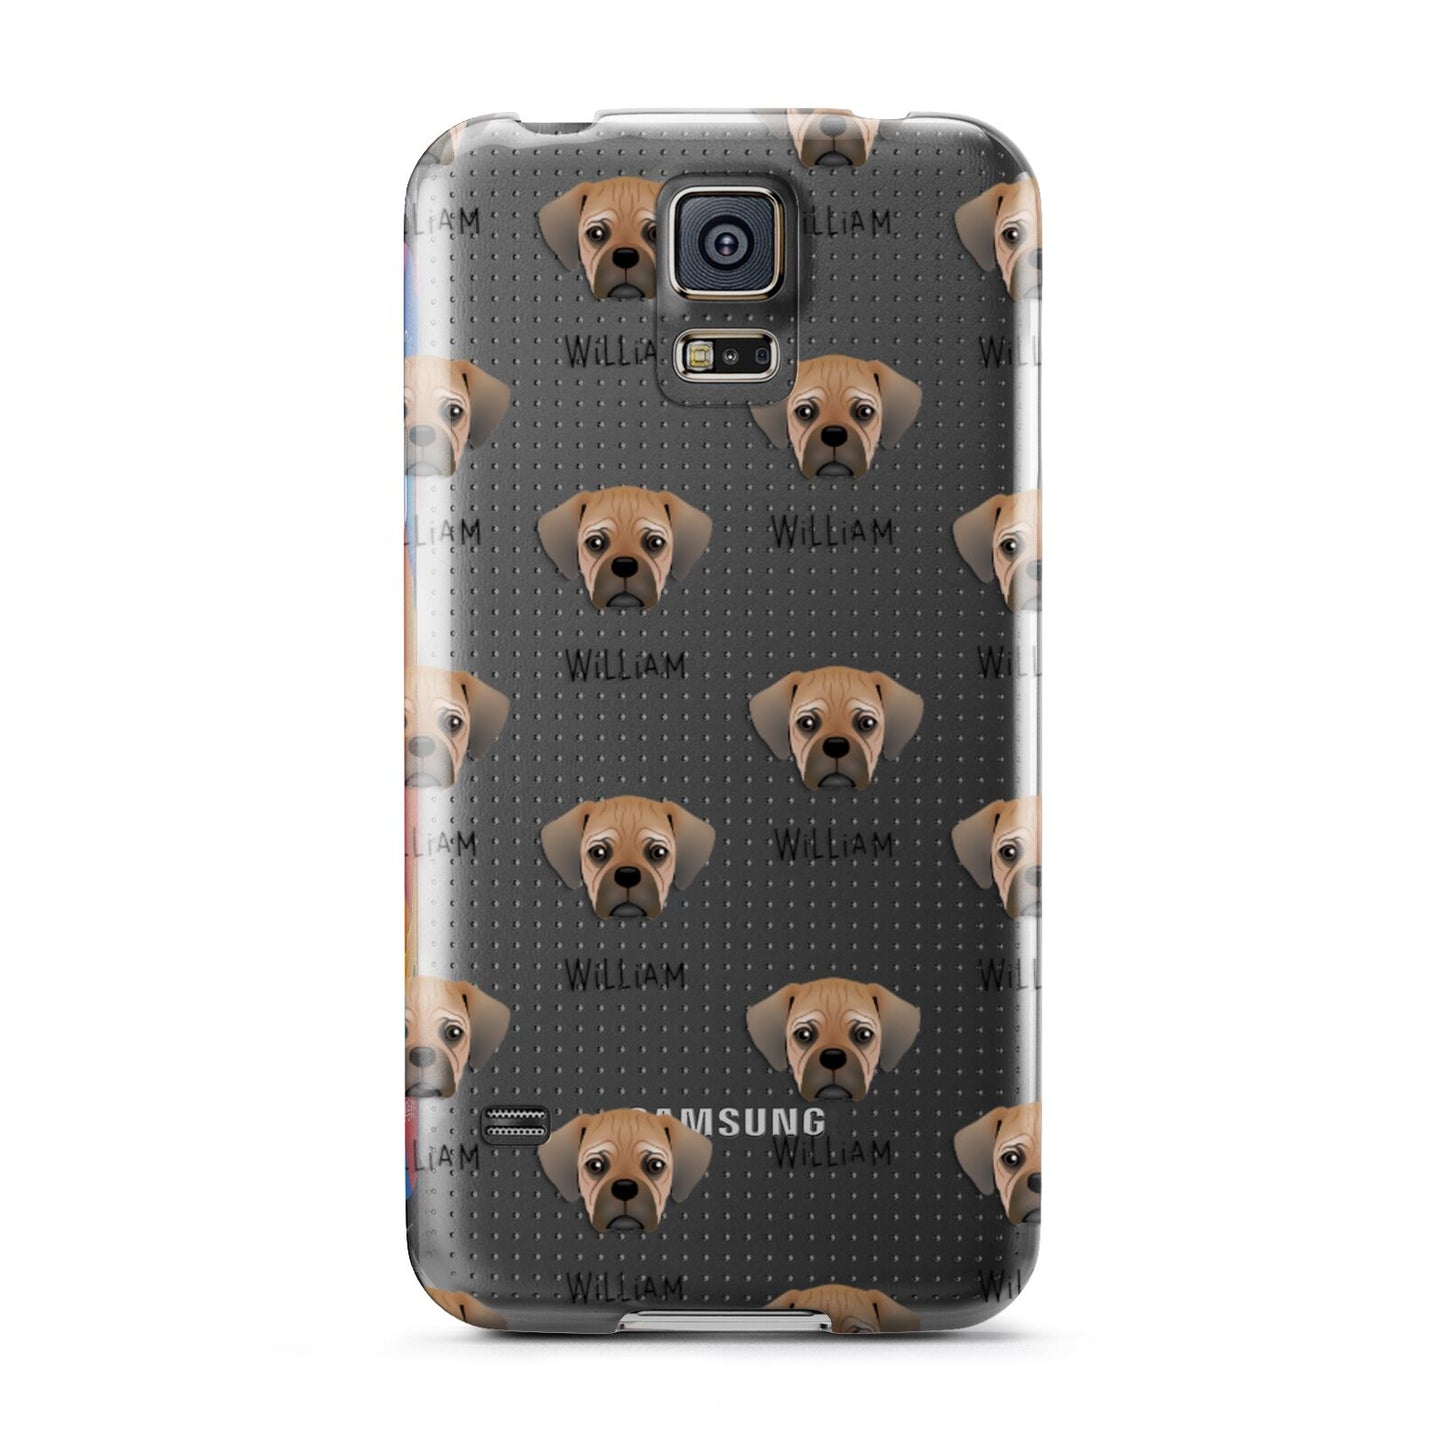 Pugalier Icon with Name Samsung Galaxy S5 Case